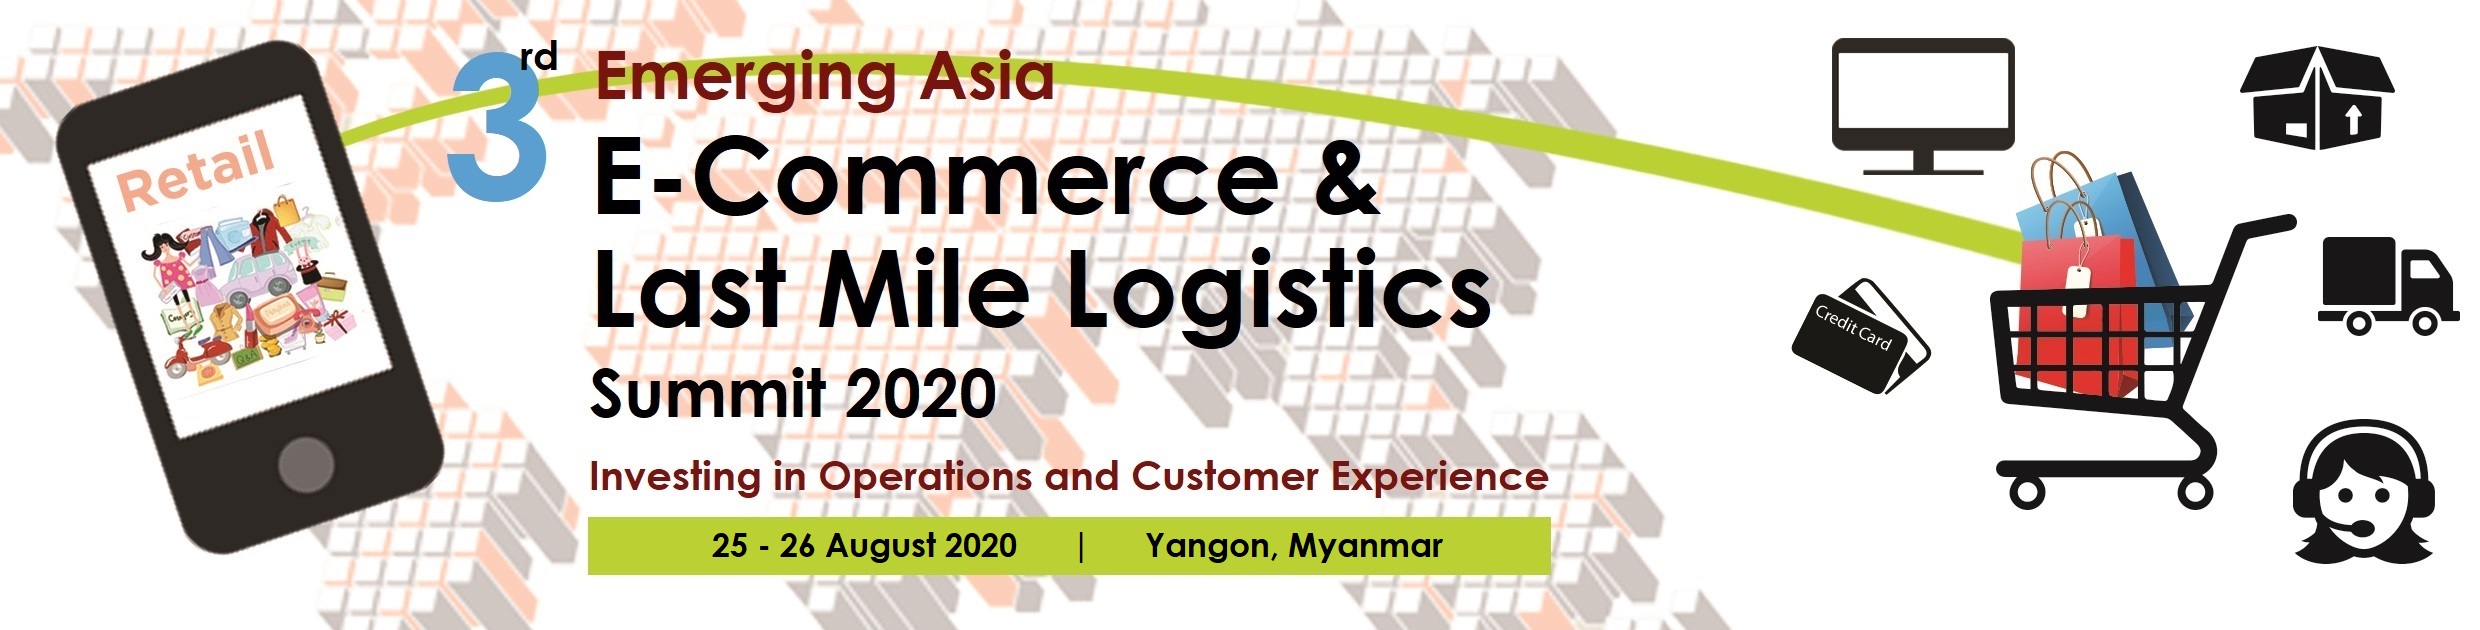 3rd Emerging Asia E-Commerce & Last Mile Logistics Summit 2020 organized by Magenta Global Pte Ltd